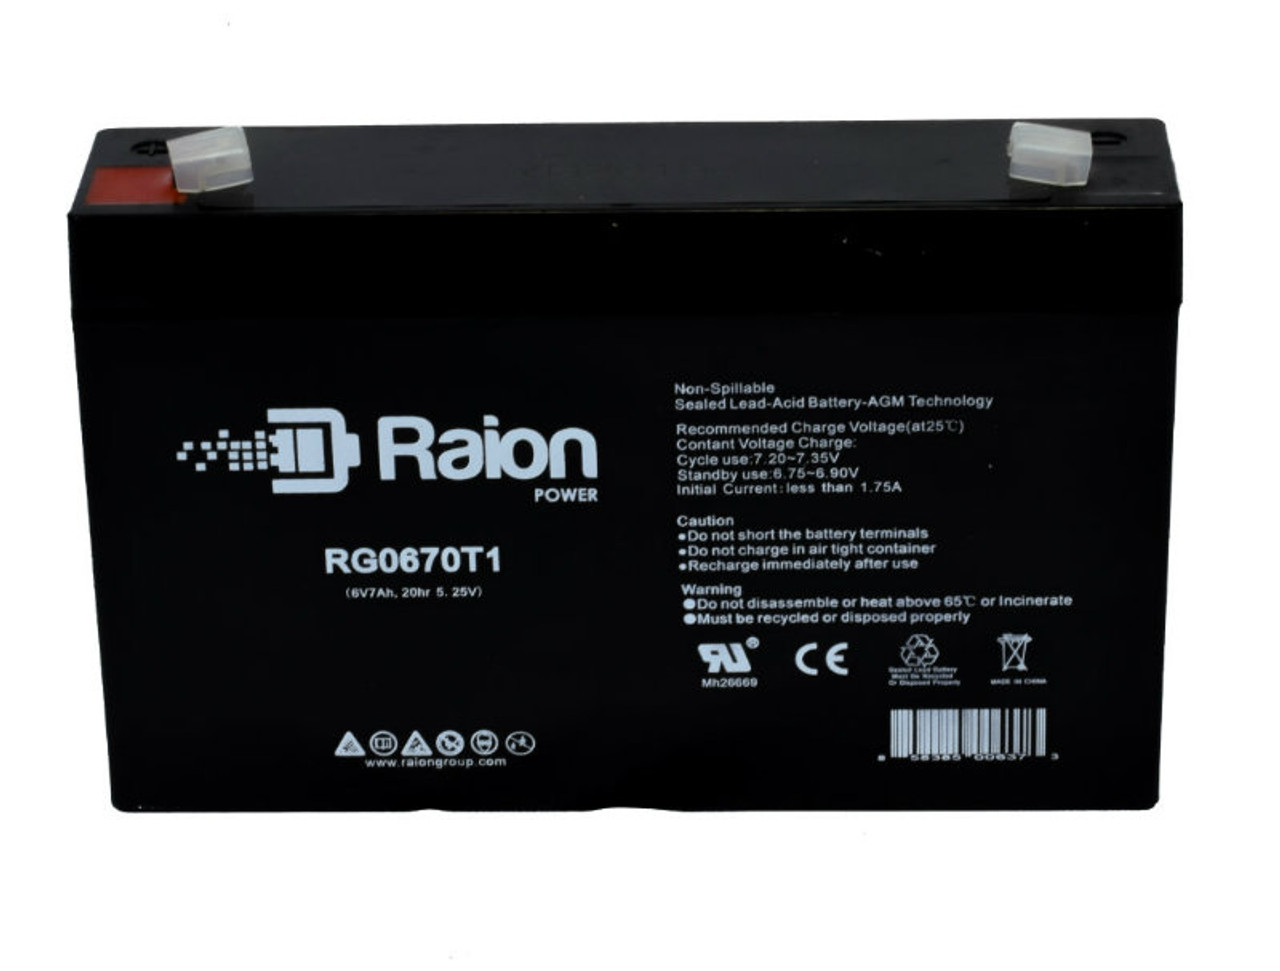 Raion Power RG0670T1 Replacement Battery Cartridge for Alaris Medical MINI PC1 INFUSION PUMP CNTRLR